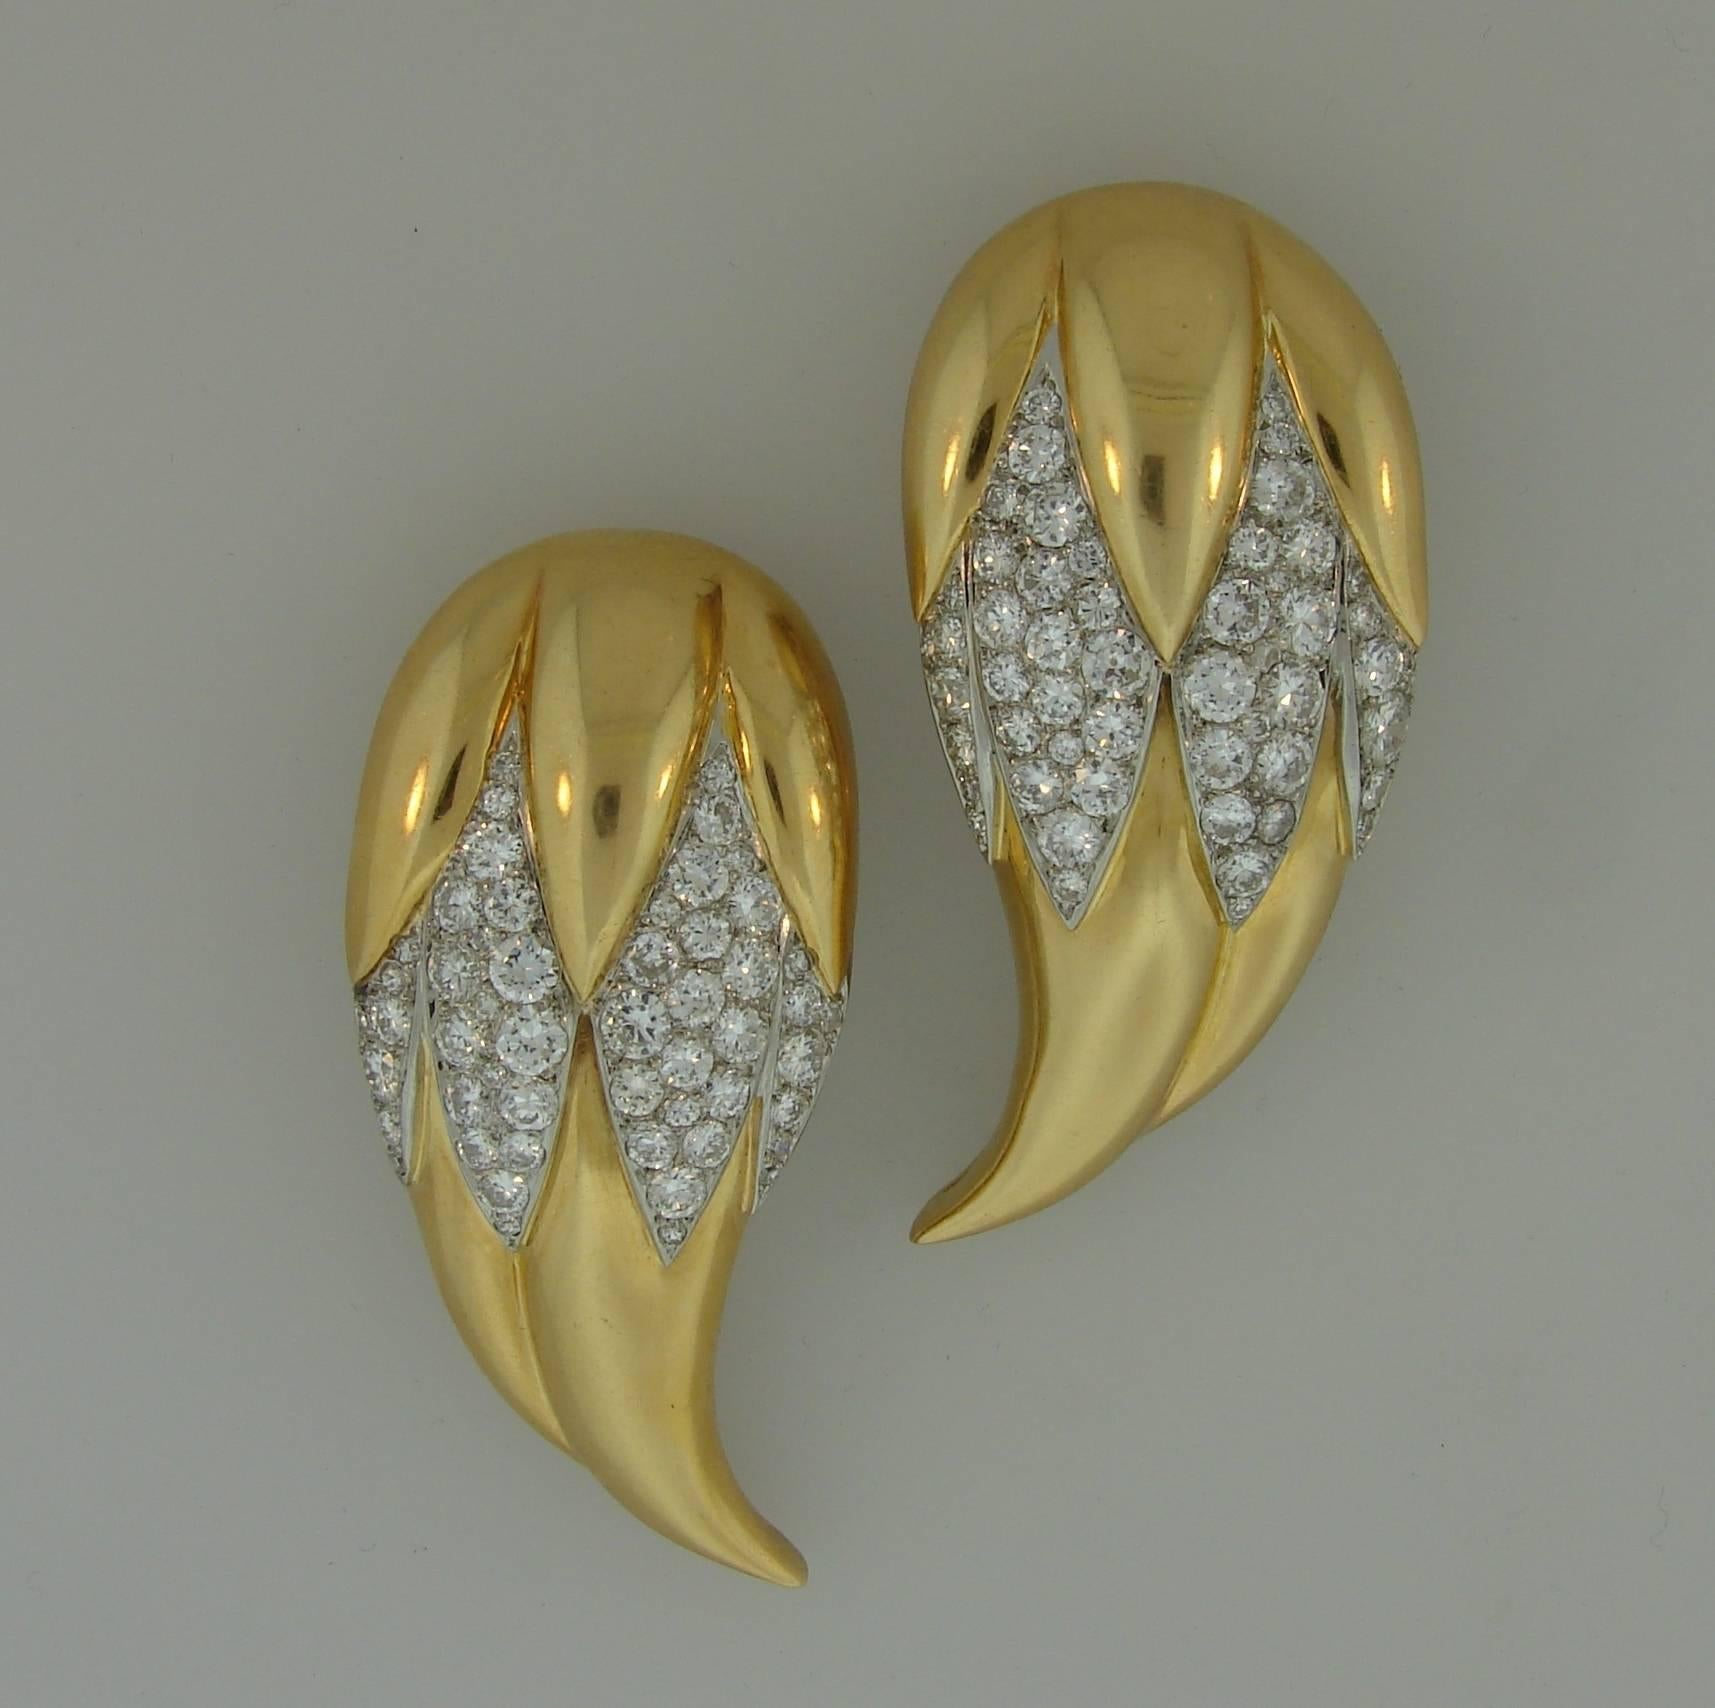 A pair of magnificent double clips designed by Suzanne Belperron and manufactured by company B. Herz in Paris between 1932 and 1940. The piece comes with an authentication certificate from Belperron LLC (see picture 10). 
The brooches are made of 18